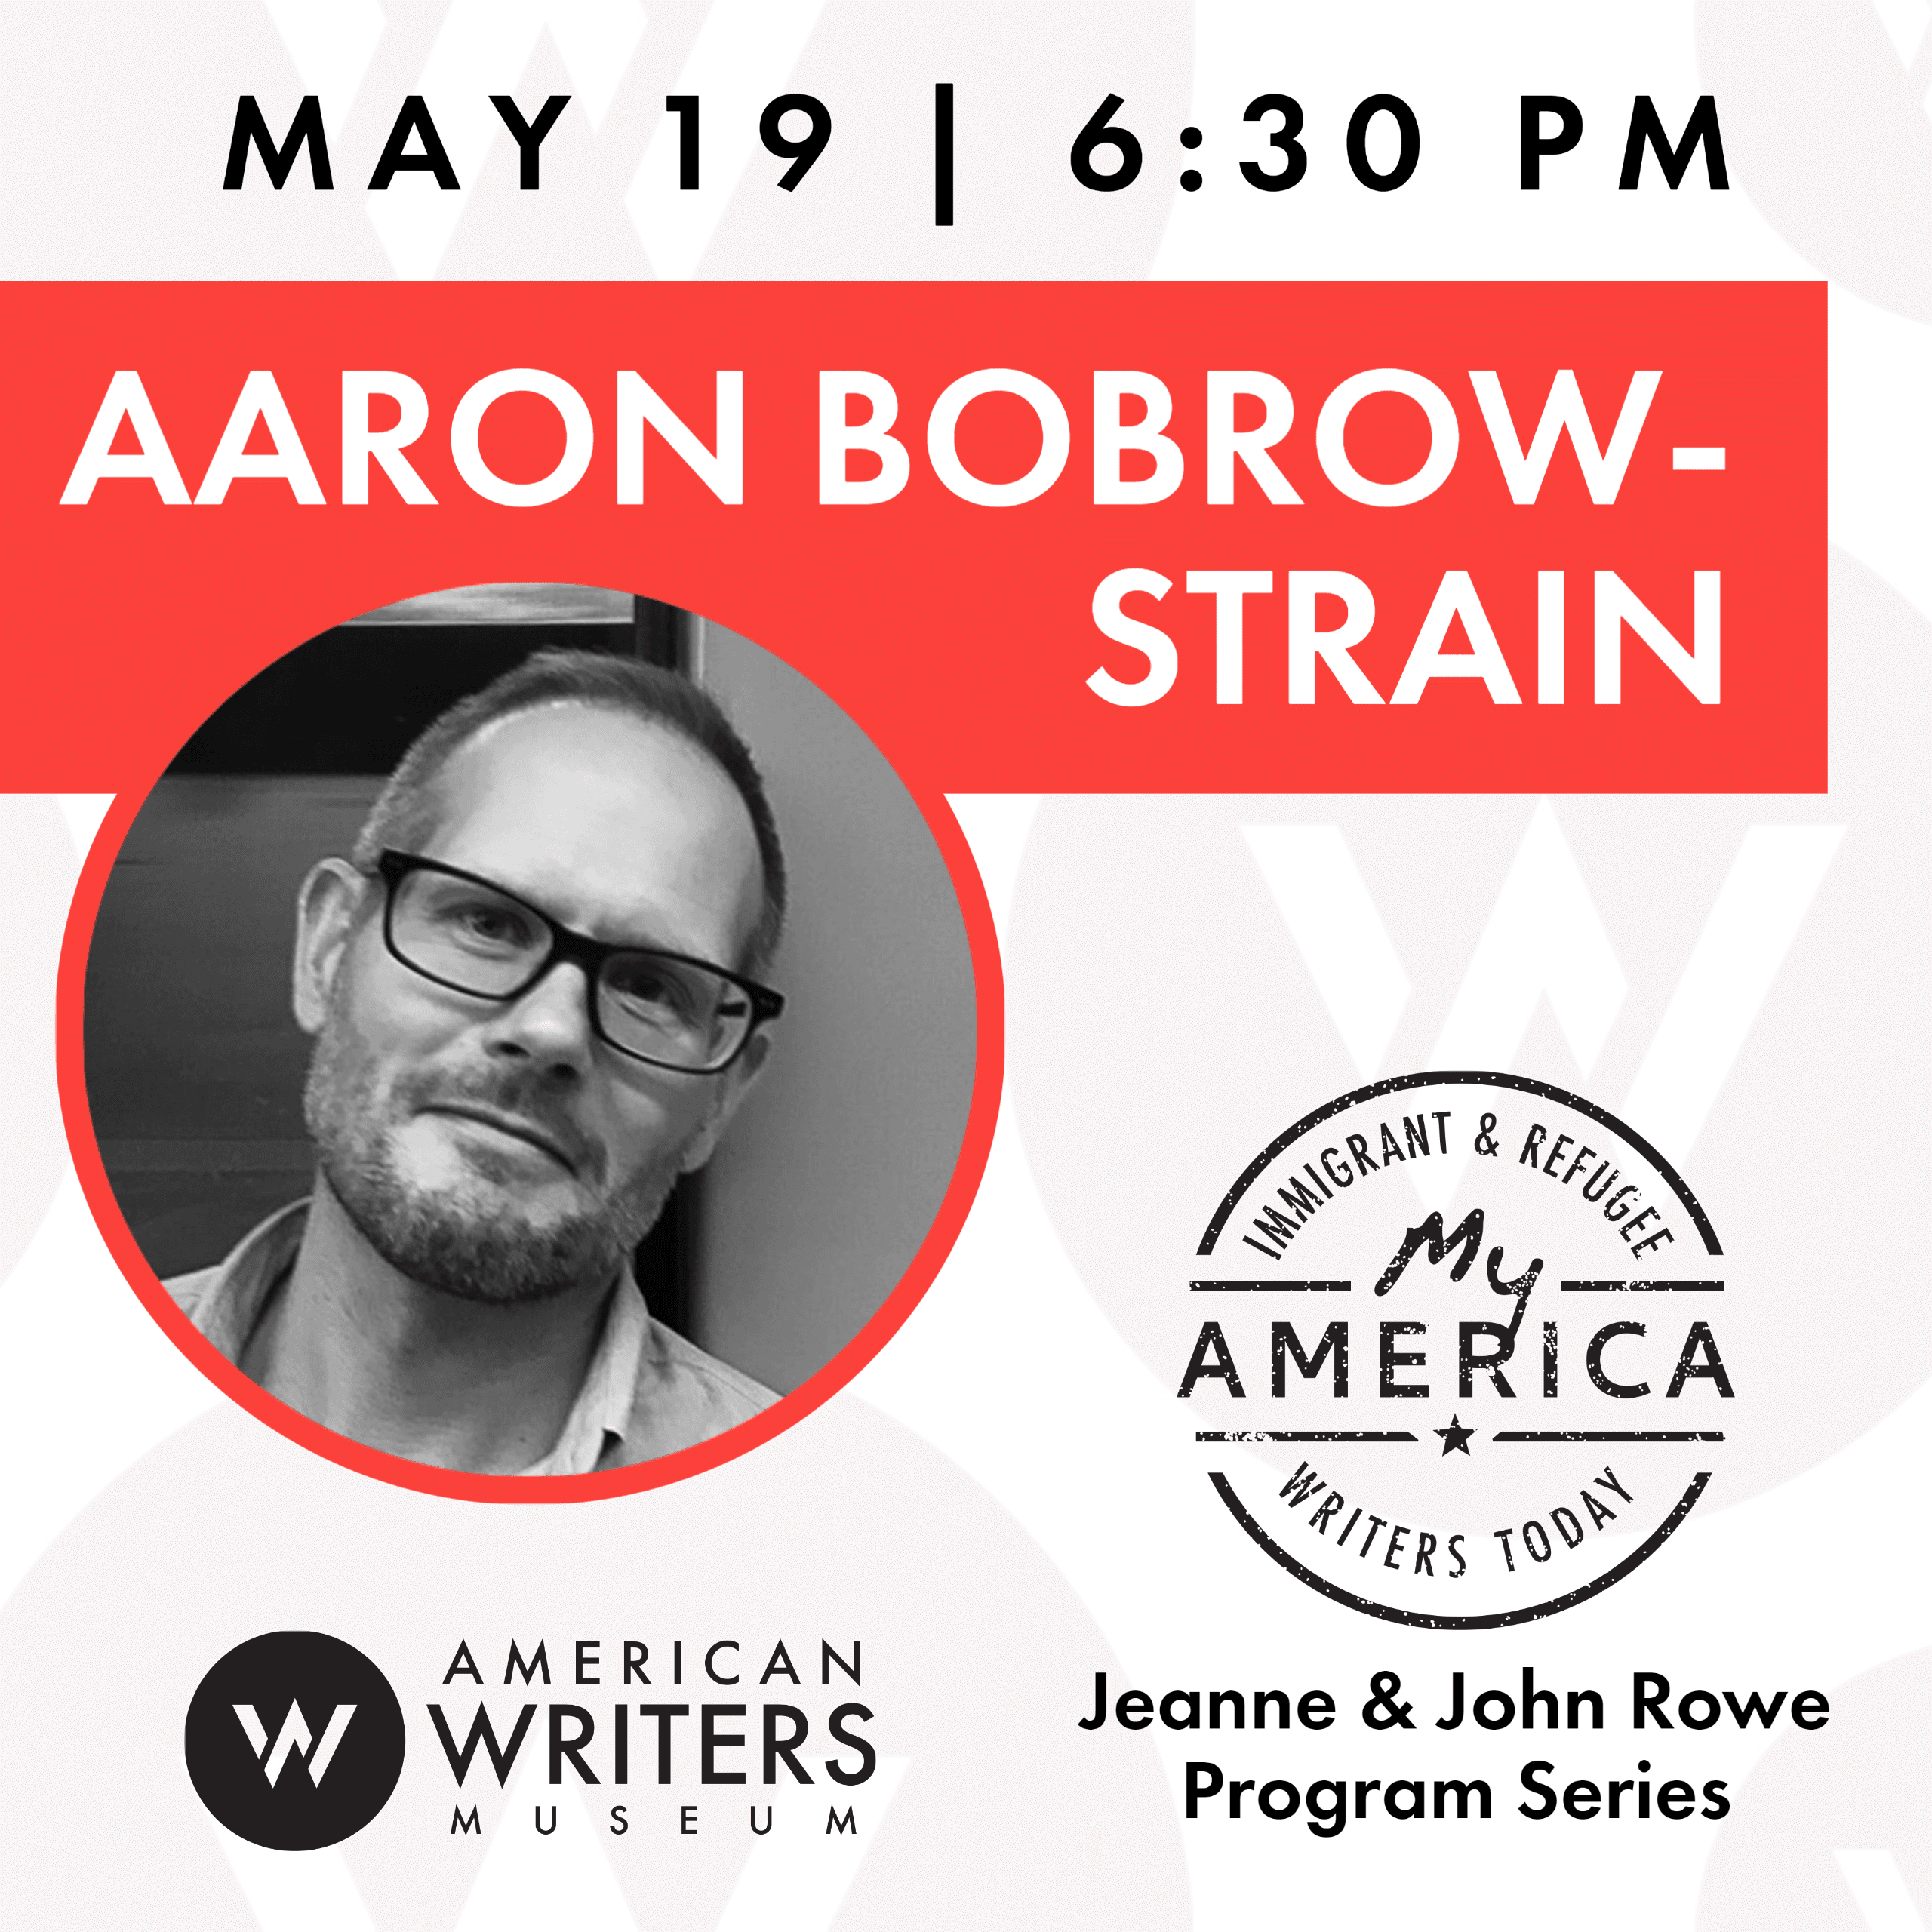 Aaron Bobrow-Strain presents his book The Death and Life of Aida Hernandez at the American Writers Museum on May 19